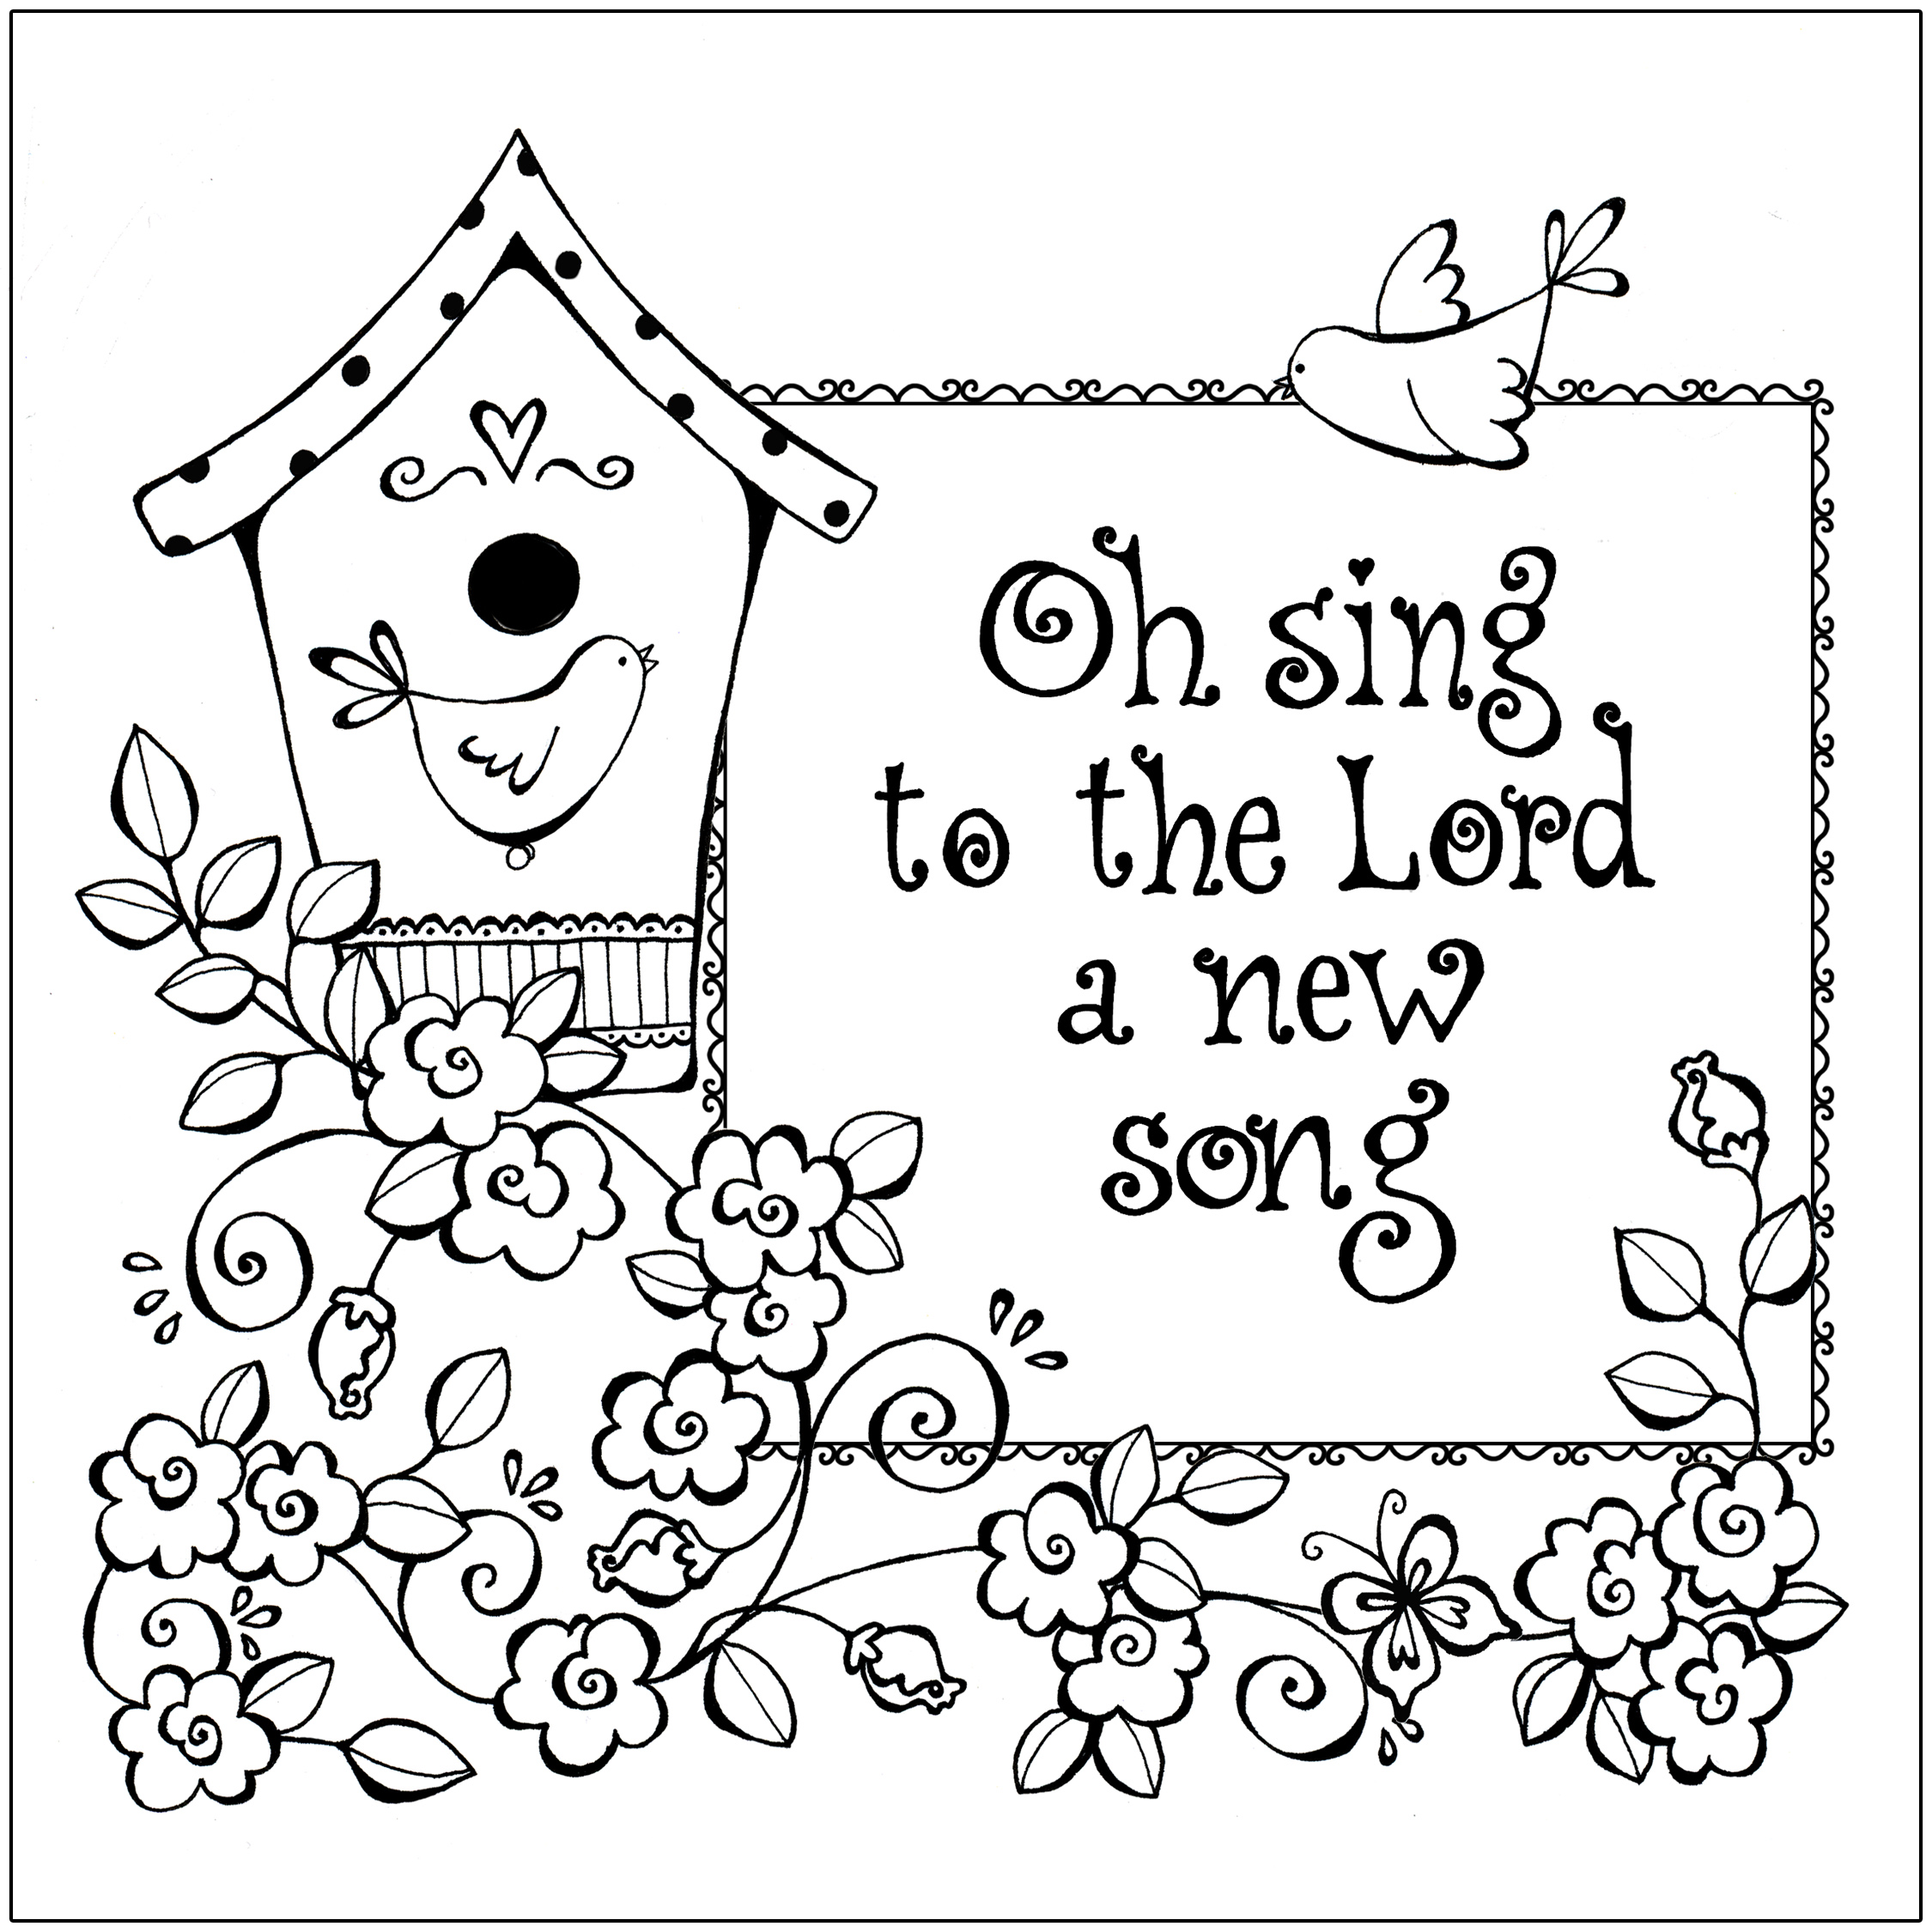 Coloring Pages Are A Great Way To Teach Children God S Word And Wisdom